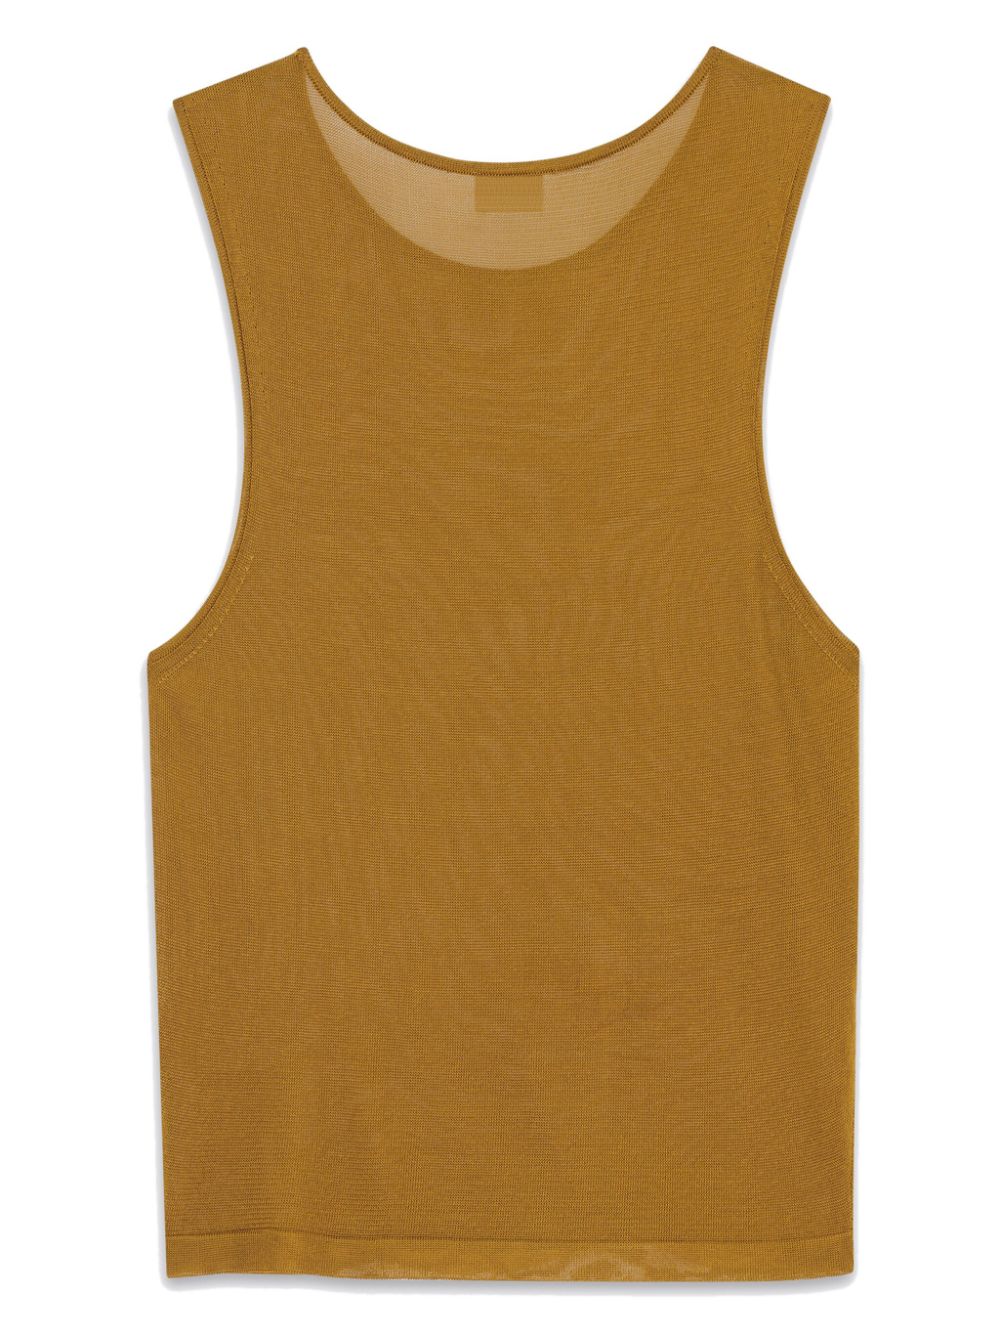 SAINT LAURENT Luxurious Cropped Tank Top in Camel Brown for Women